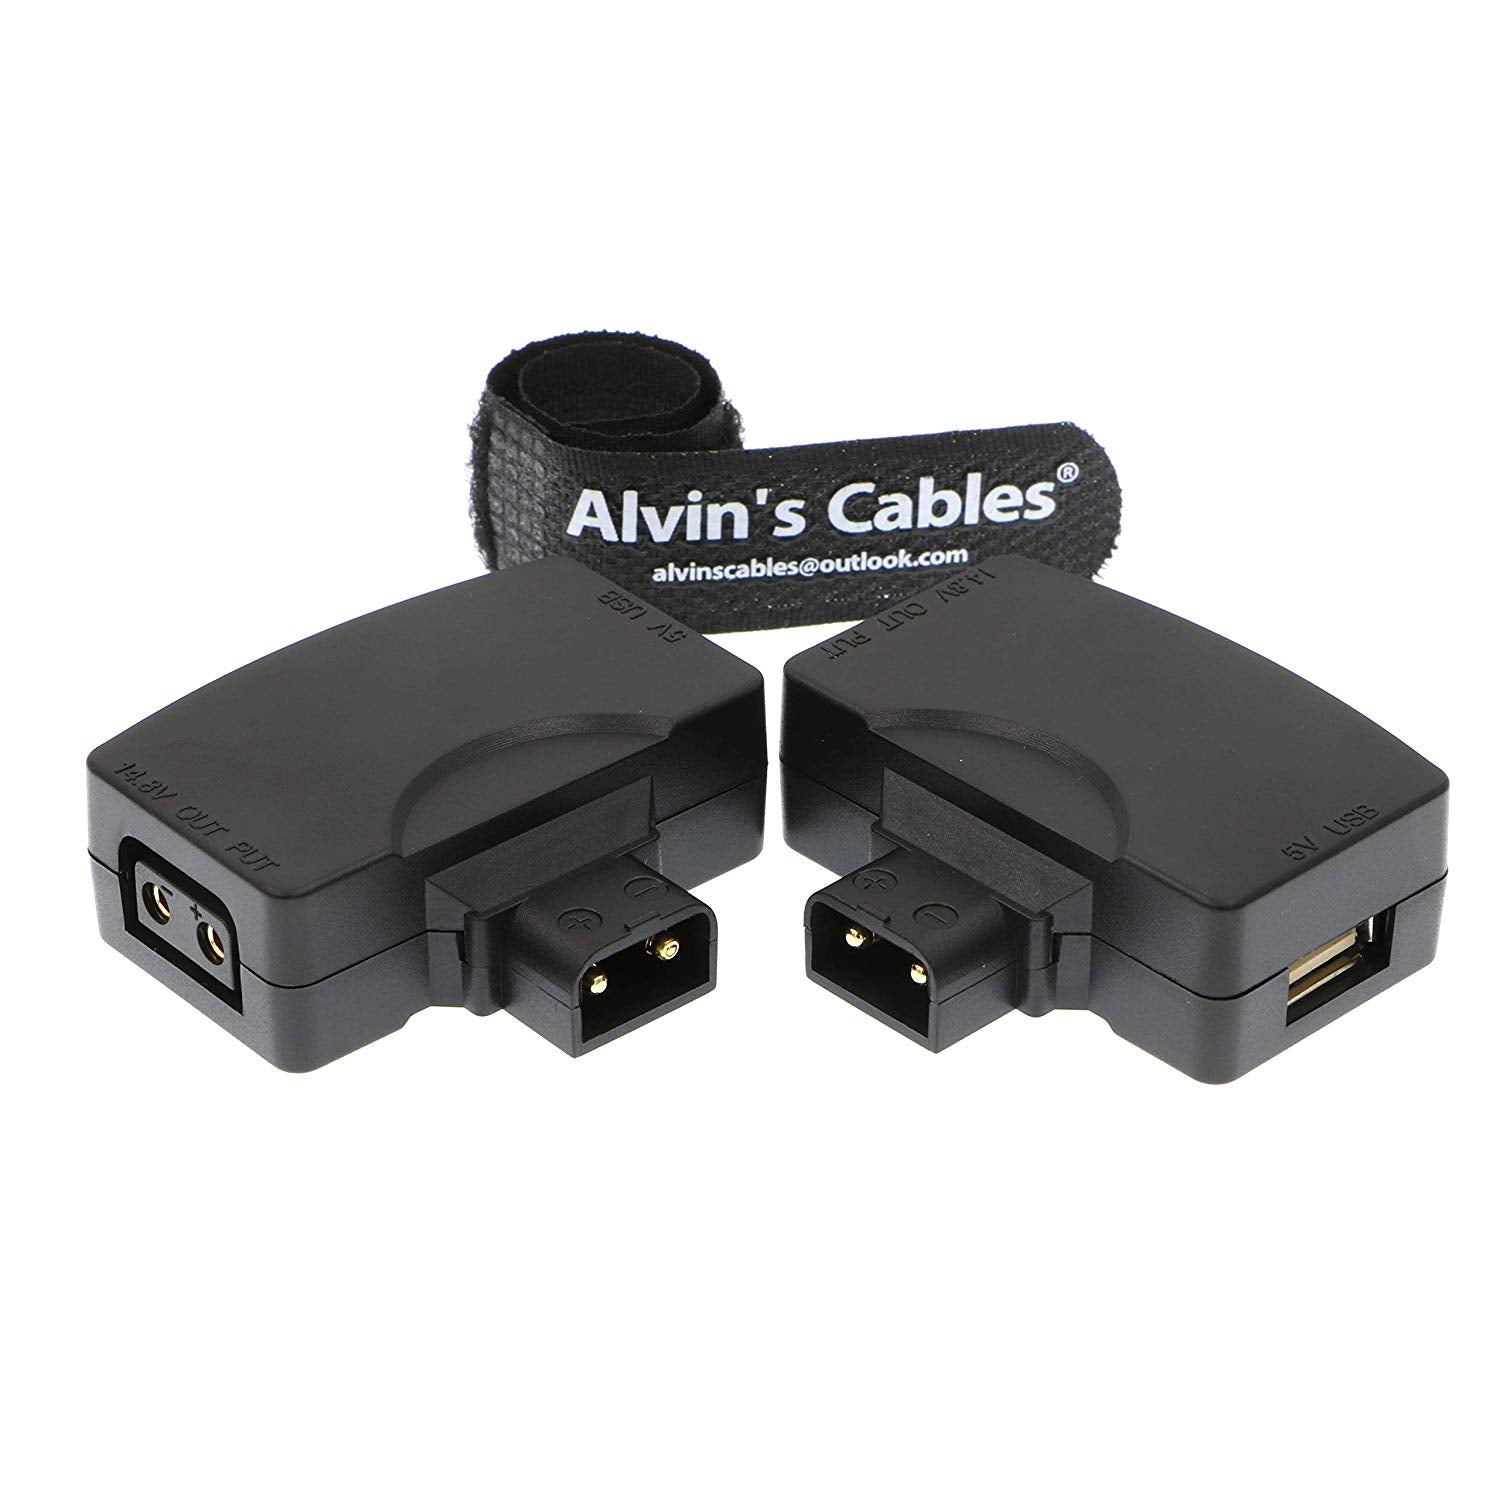 Alvin's Cables D Tap P Tap to USB 5V Adapter Converter Dtap Male to Female 5V USB Female Connector for Phone Camera Monitor 2 Pcs